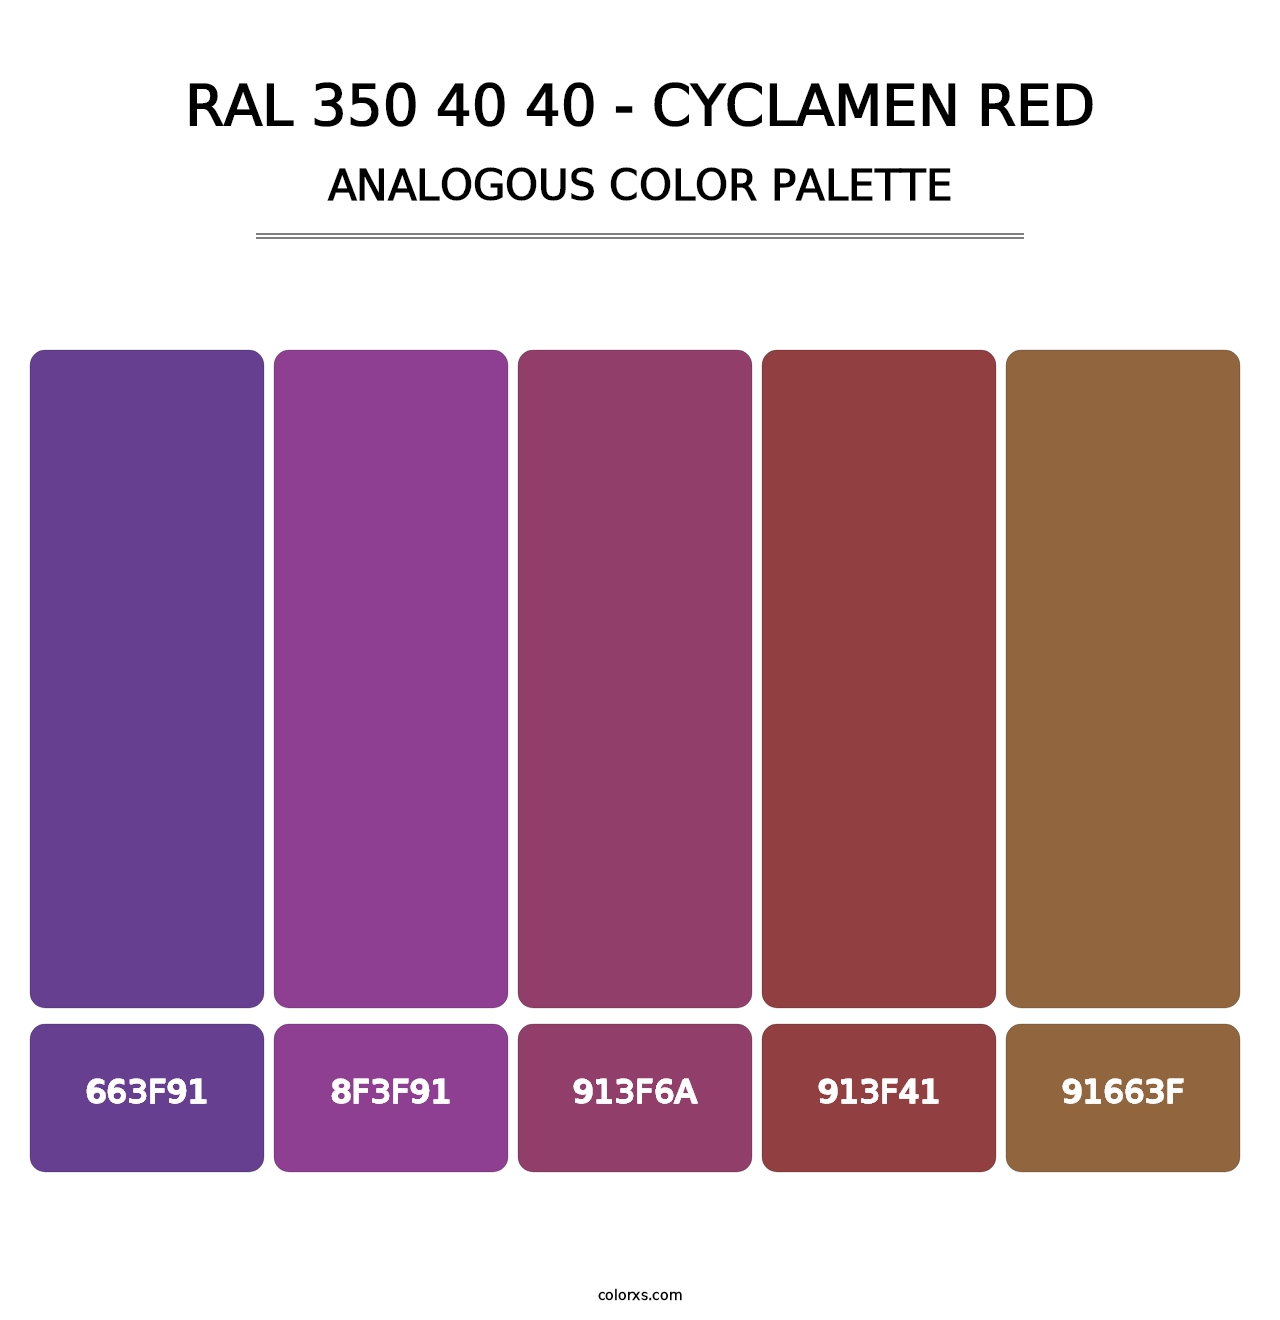 RAL 350 40 40 - Cyclamen Red - Analogous Color Palette